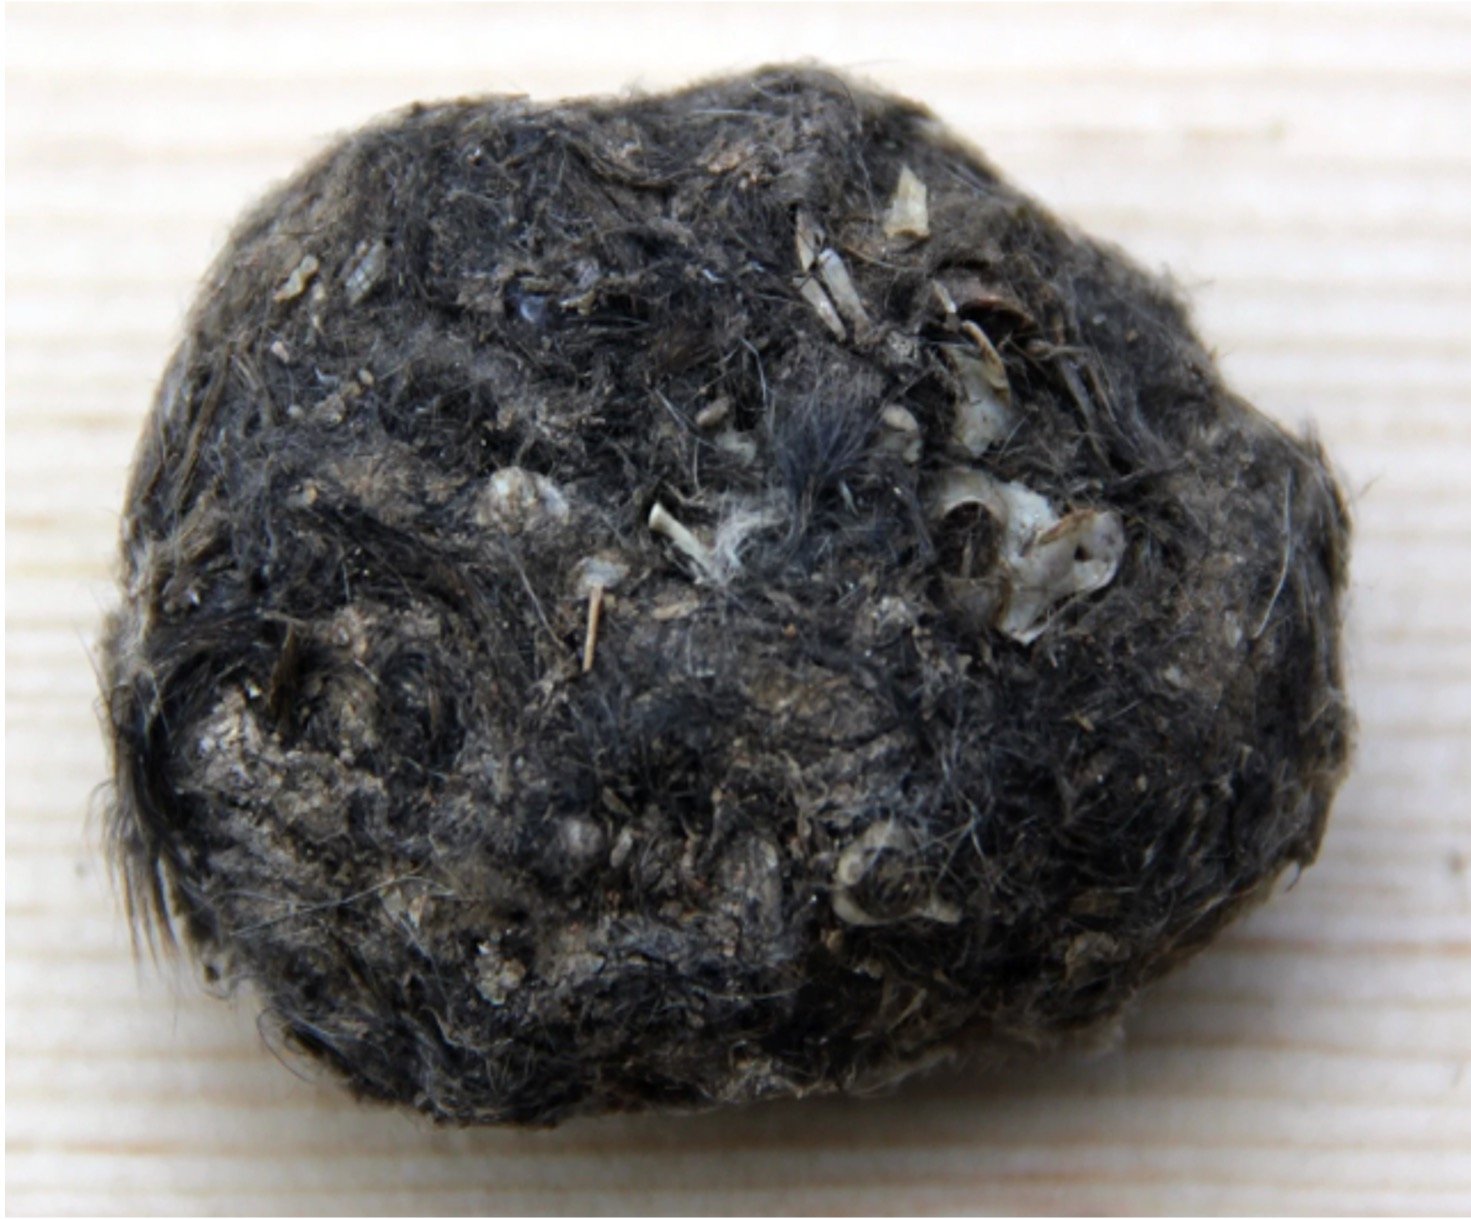 What Is An Owl Pellet